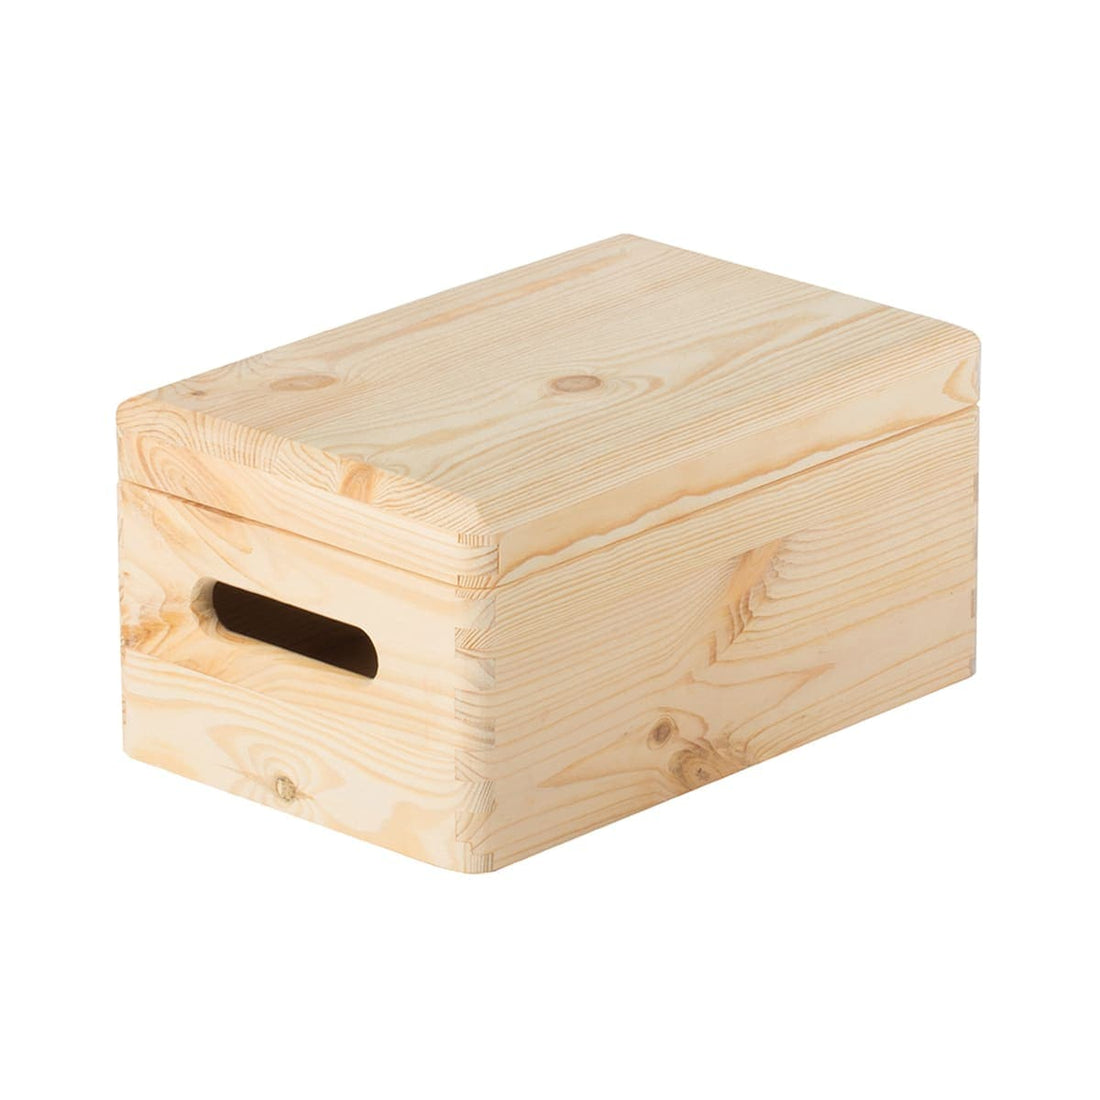 CONTAINER WITH LID L30xW20xH14CM IN GREY WOOD - best price from Maltashopper.com BR410170248